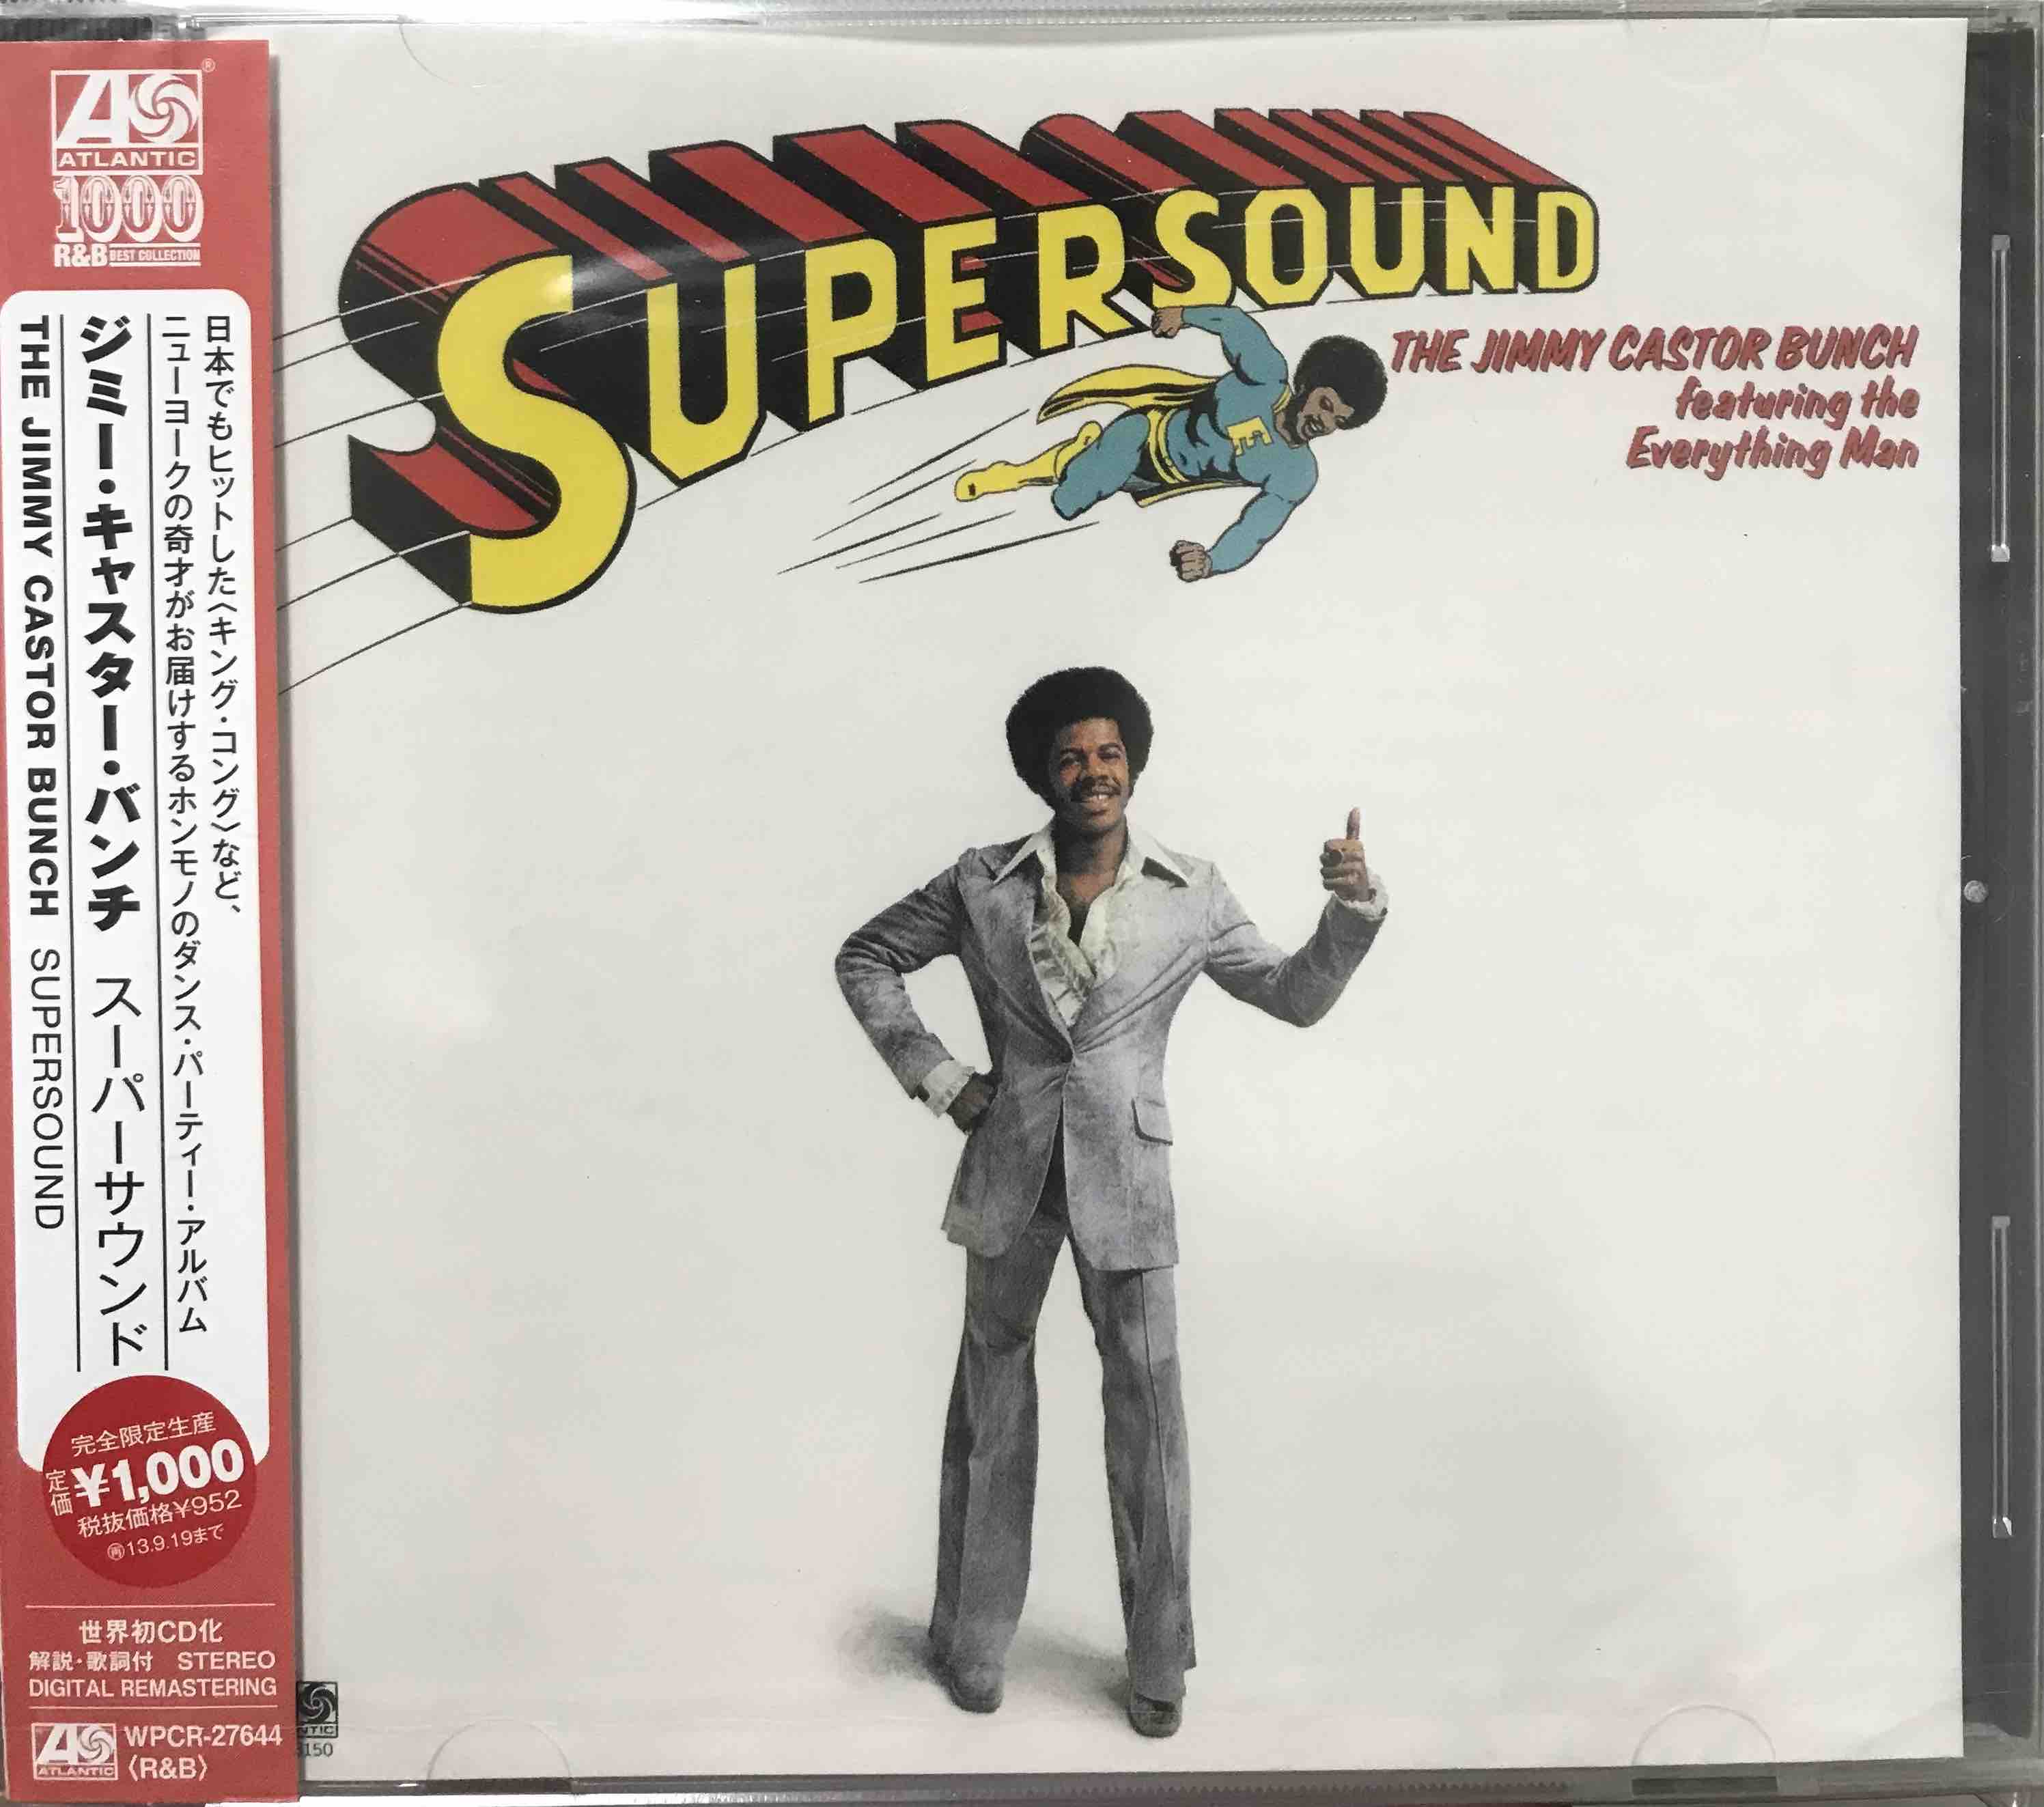 The Jimmy Castor Bunch Featuring The Everything Man ‎– Supersound